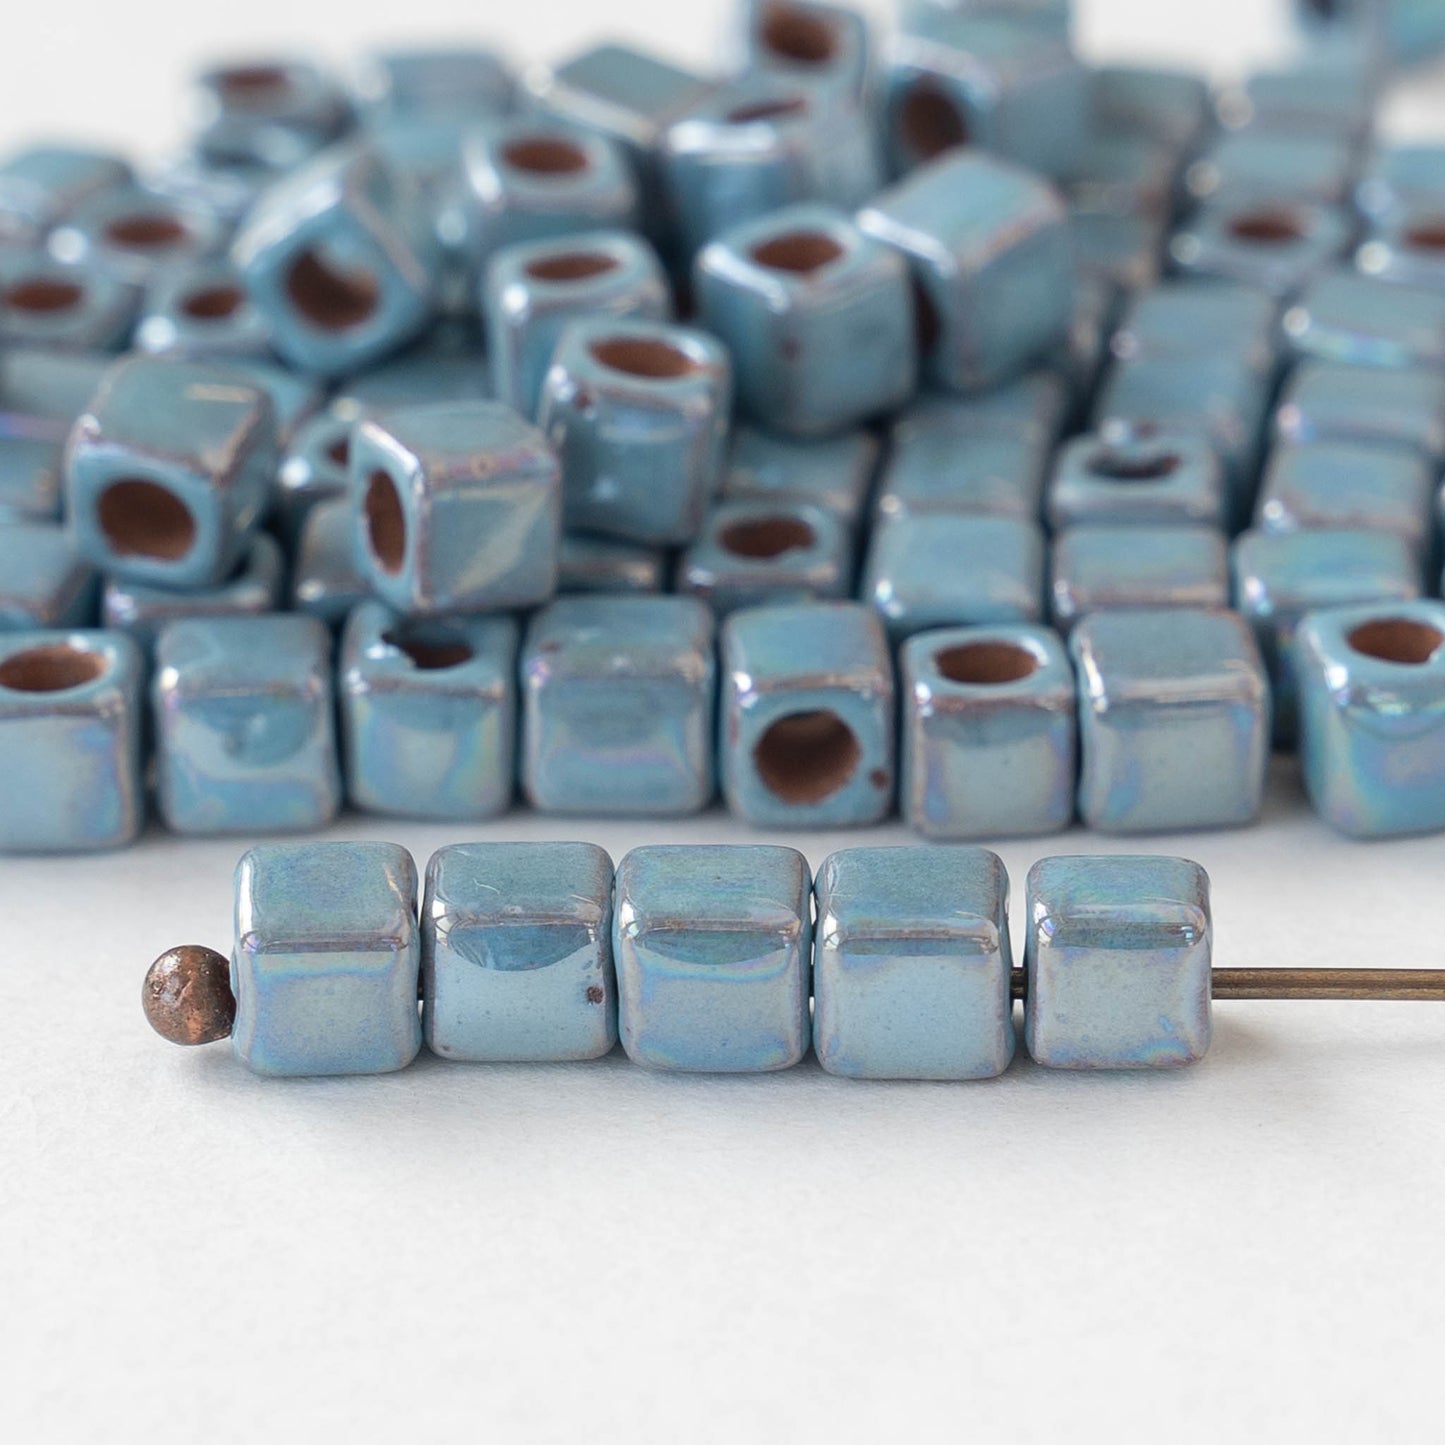 5.5mm Shiny Cube Beads - Iridescent Light Blue - 10 or 30 beads